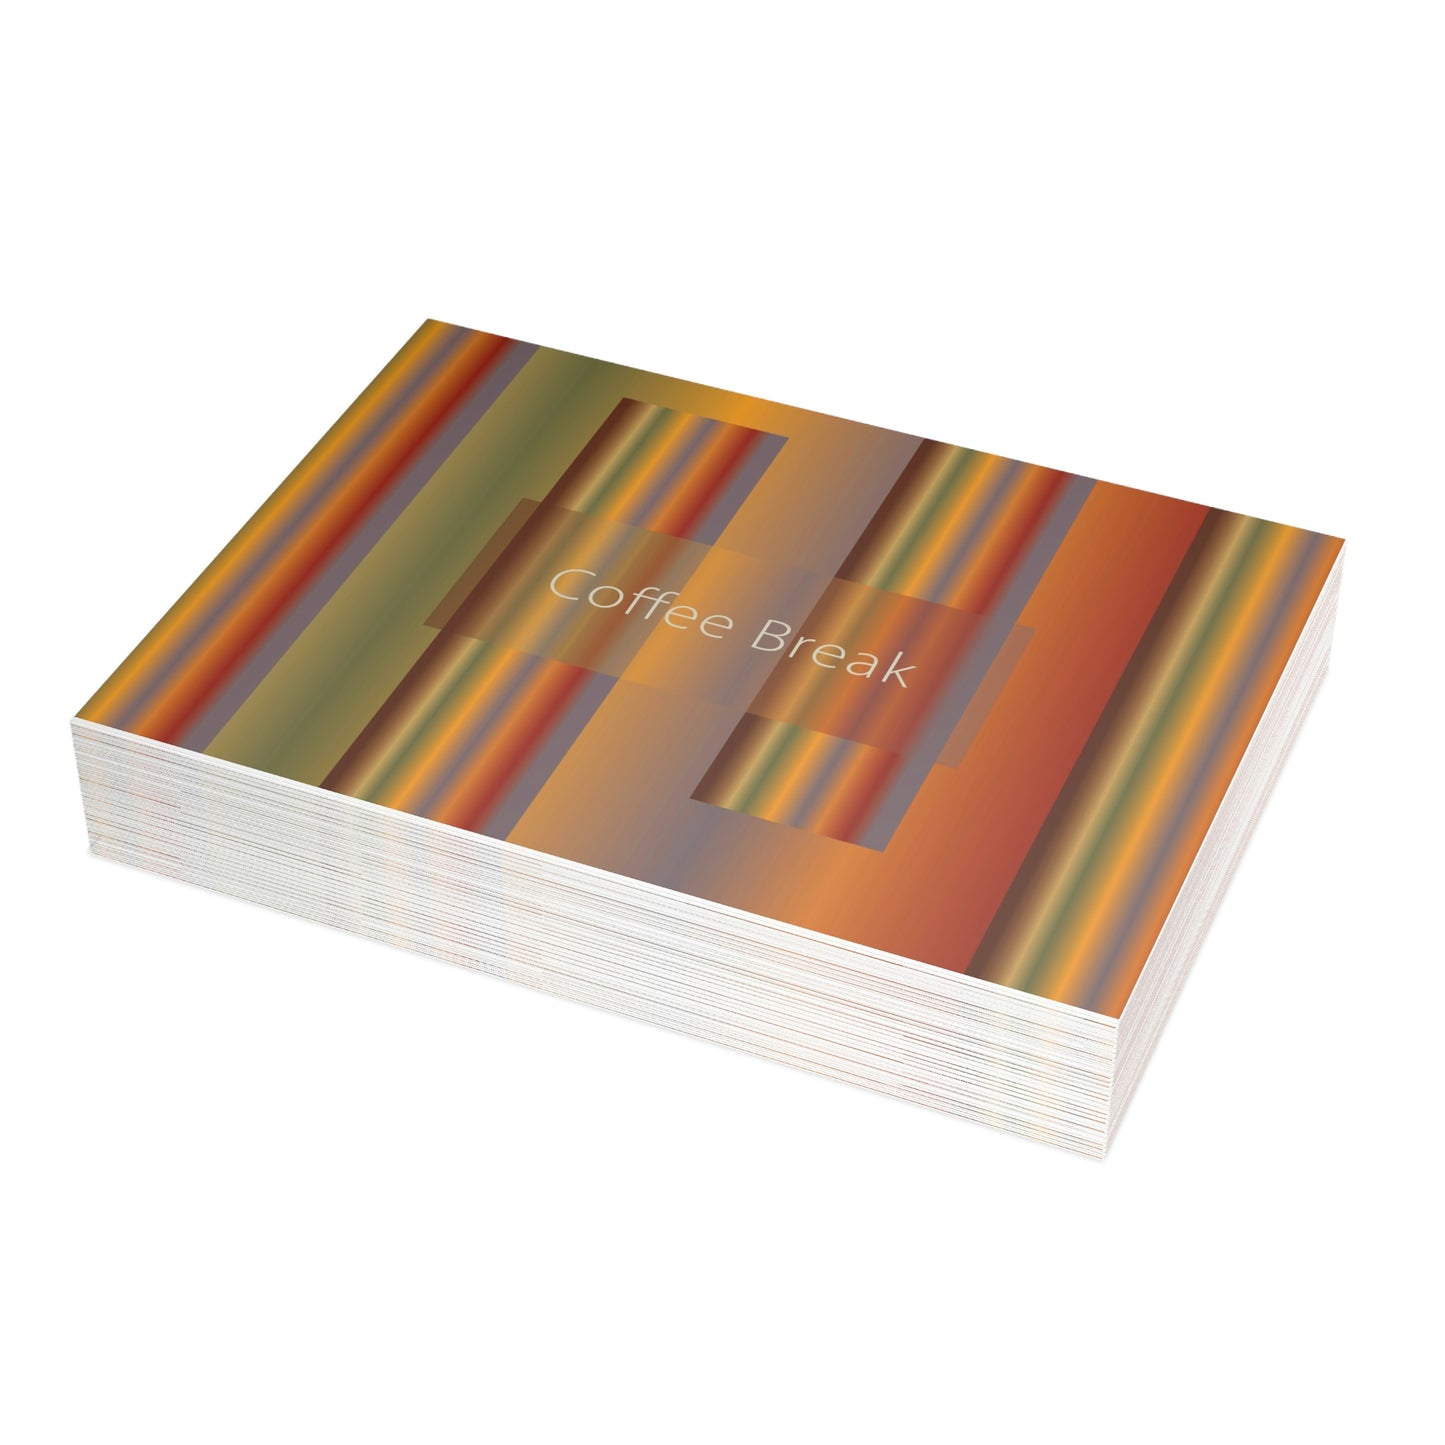 Unfolded Greeting Cards Horizontal (10, 30, and 50pcs) Coffee Break - Design No.1700